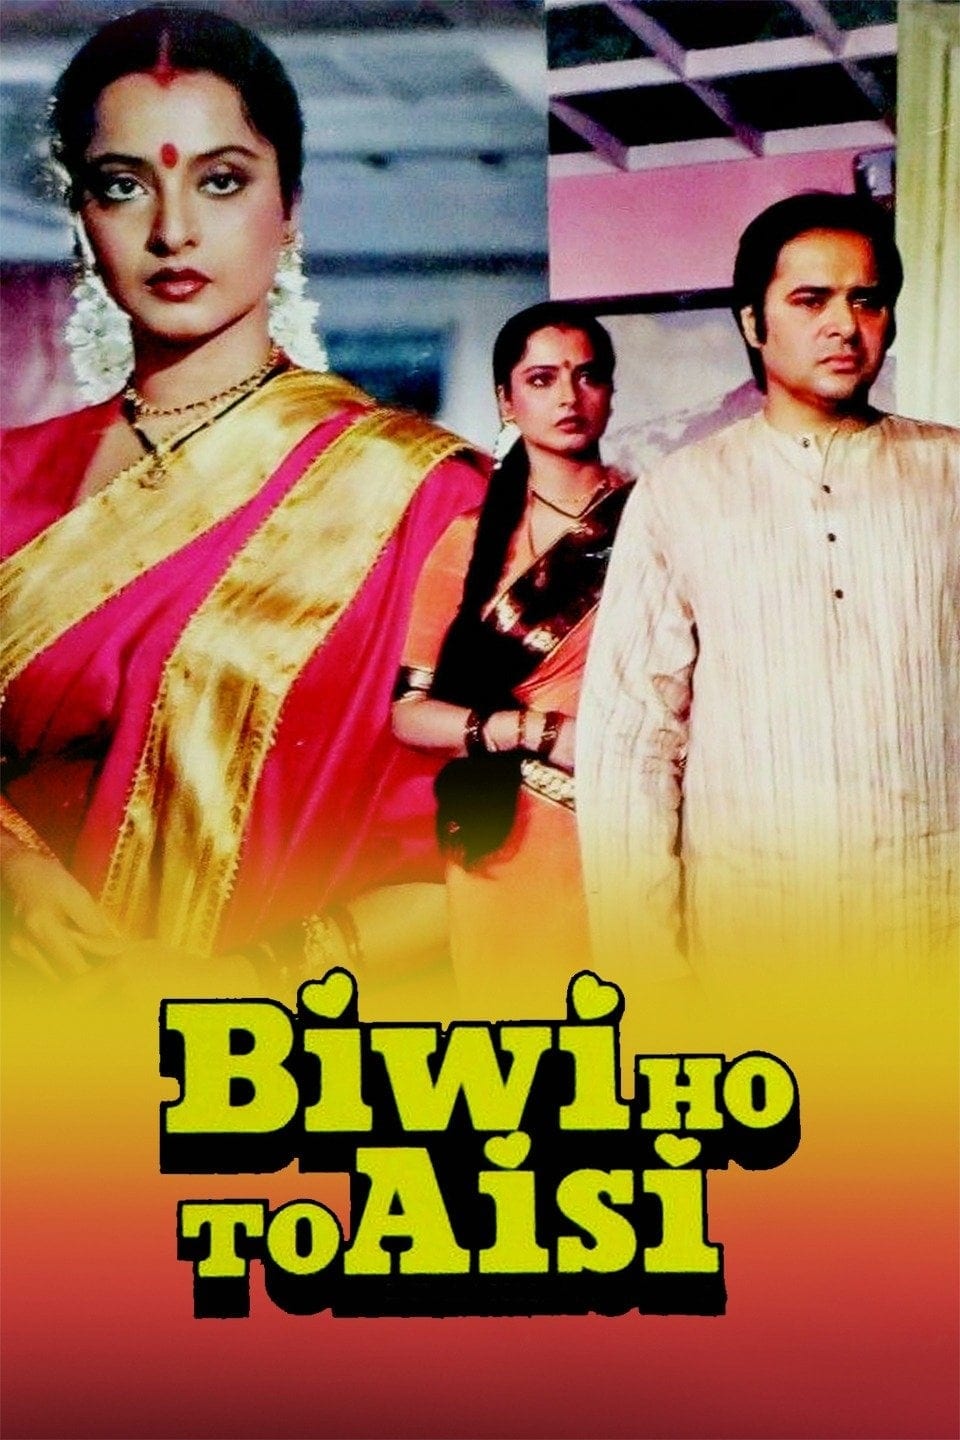 Poster for the movie "Biwi Ho To Aisi"